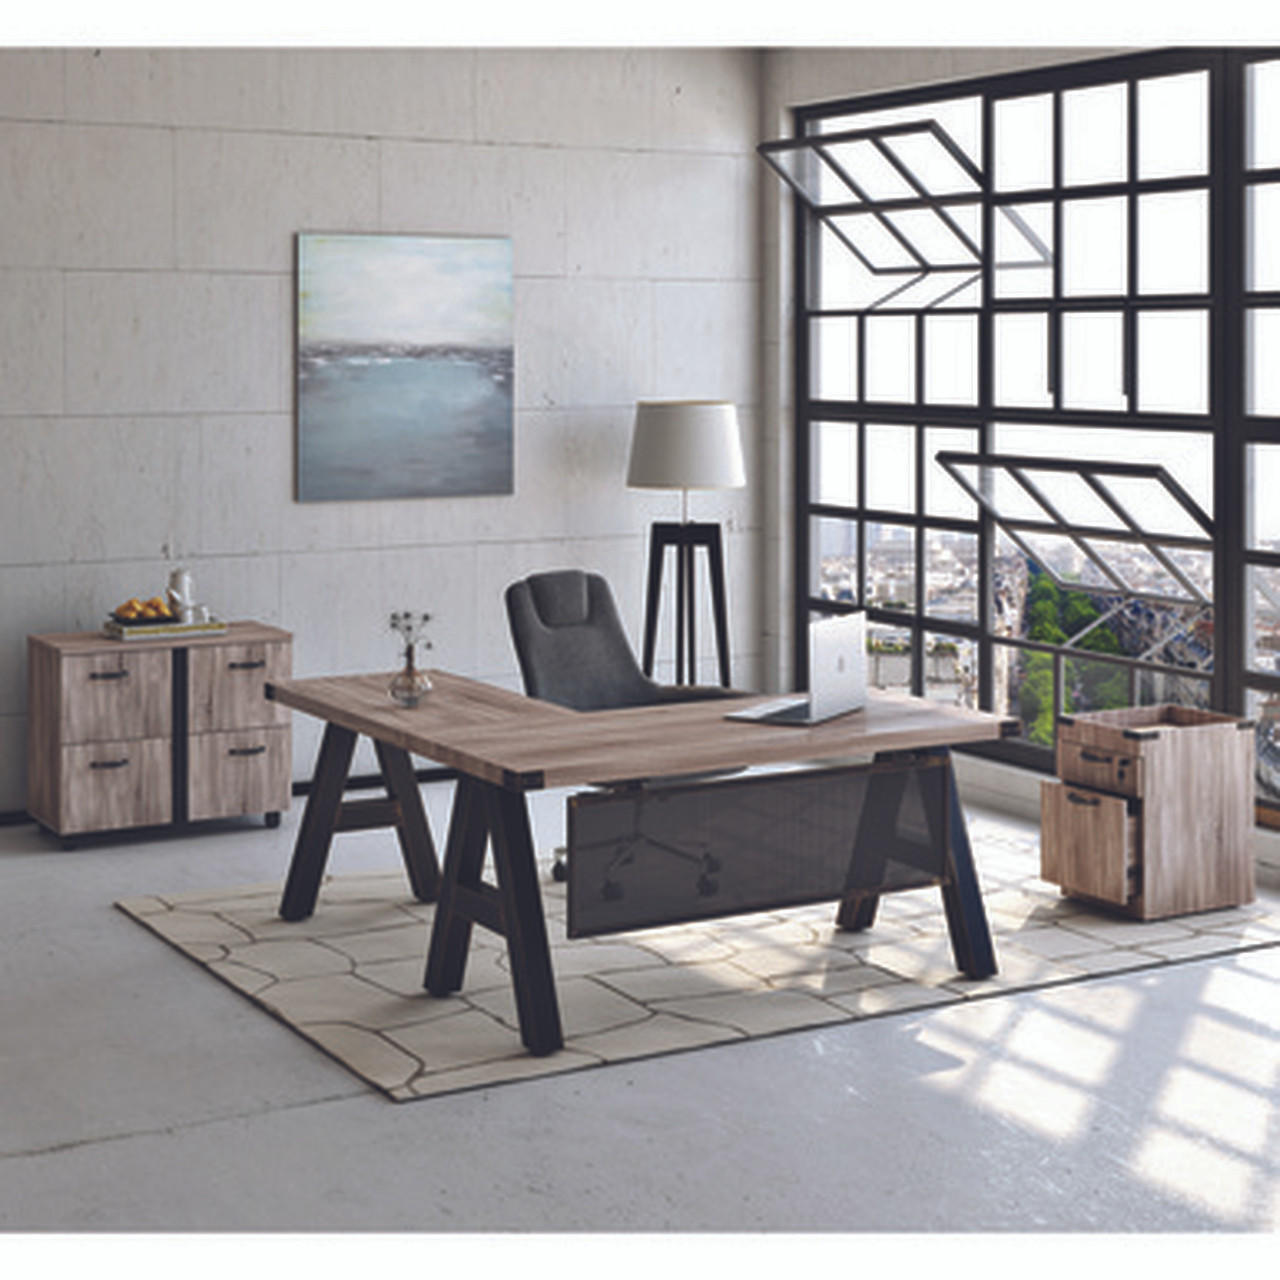  Office Source Epitome Collection Industrial Look Office Furniture Set 